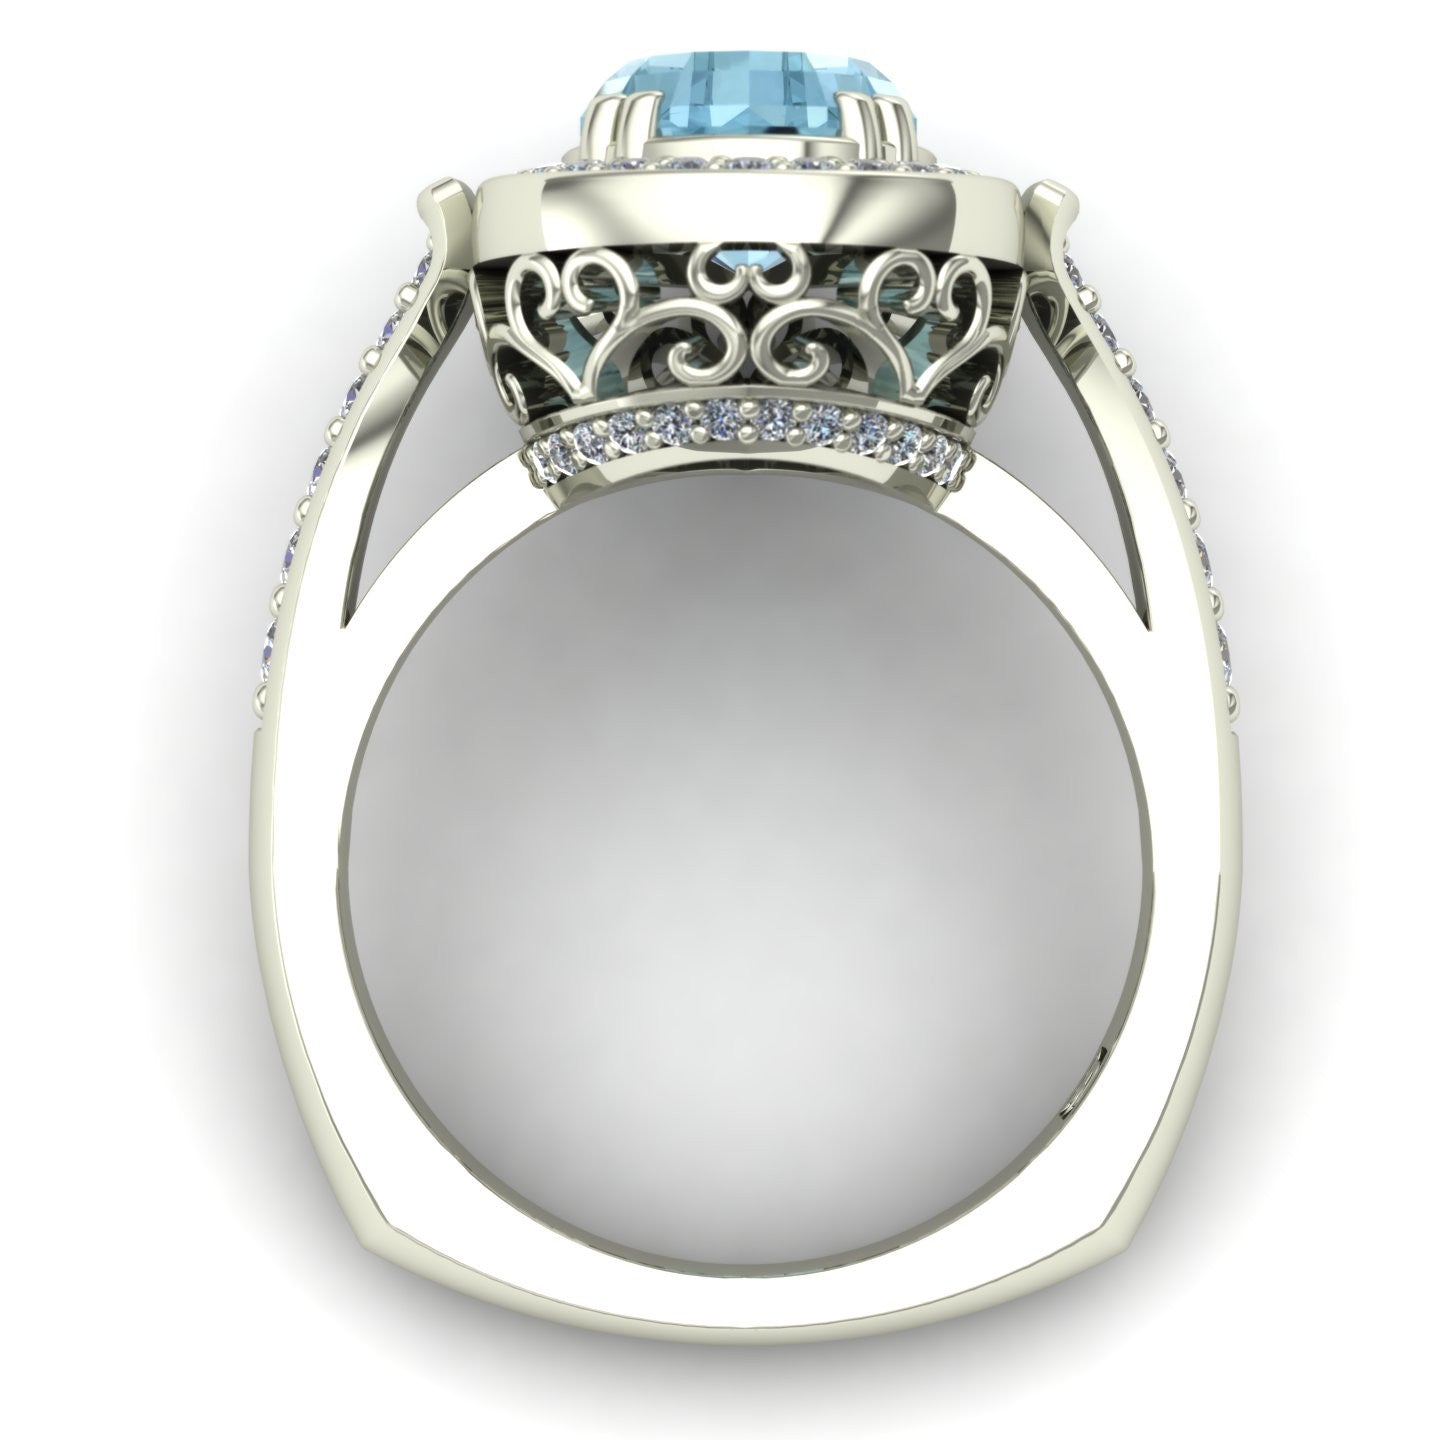 Aquamarine and diamond pear scroll ring in 14k white gold - Charles Babb Designs - through finger view